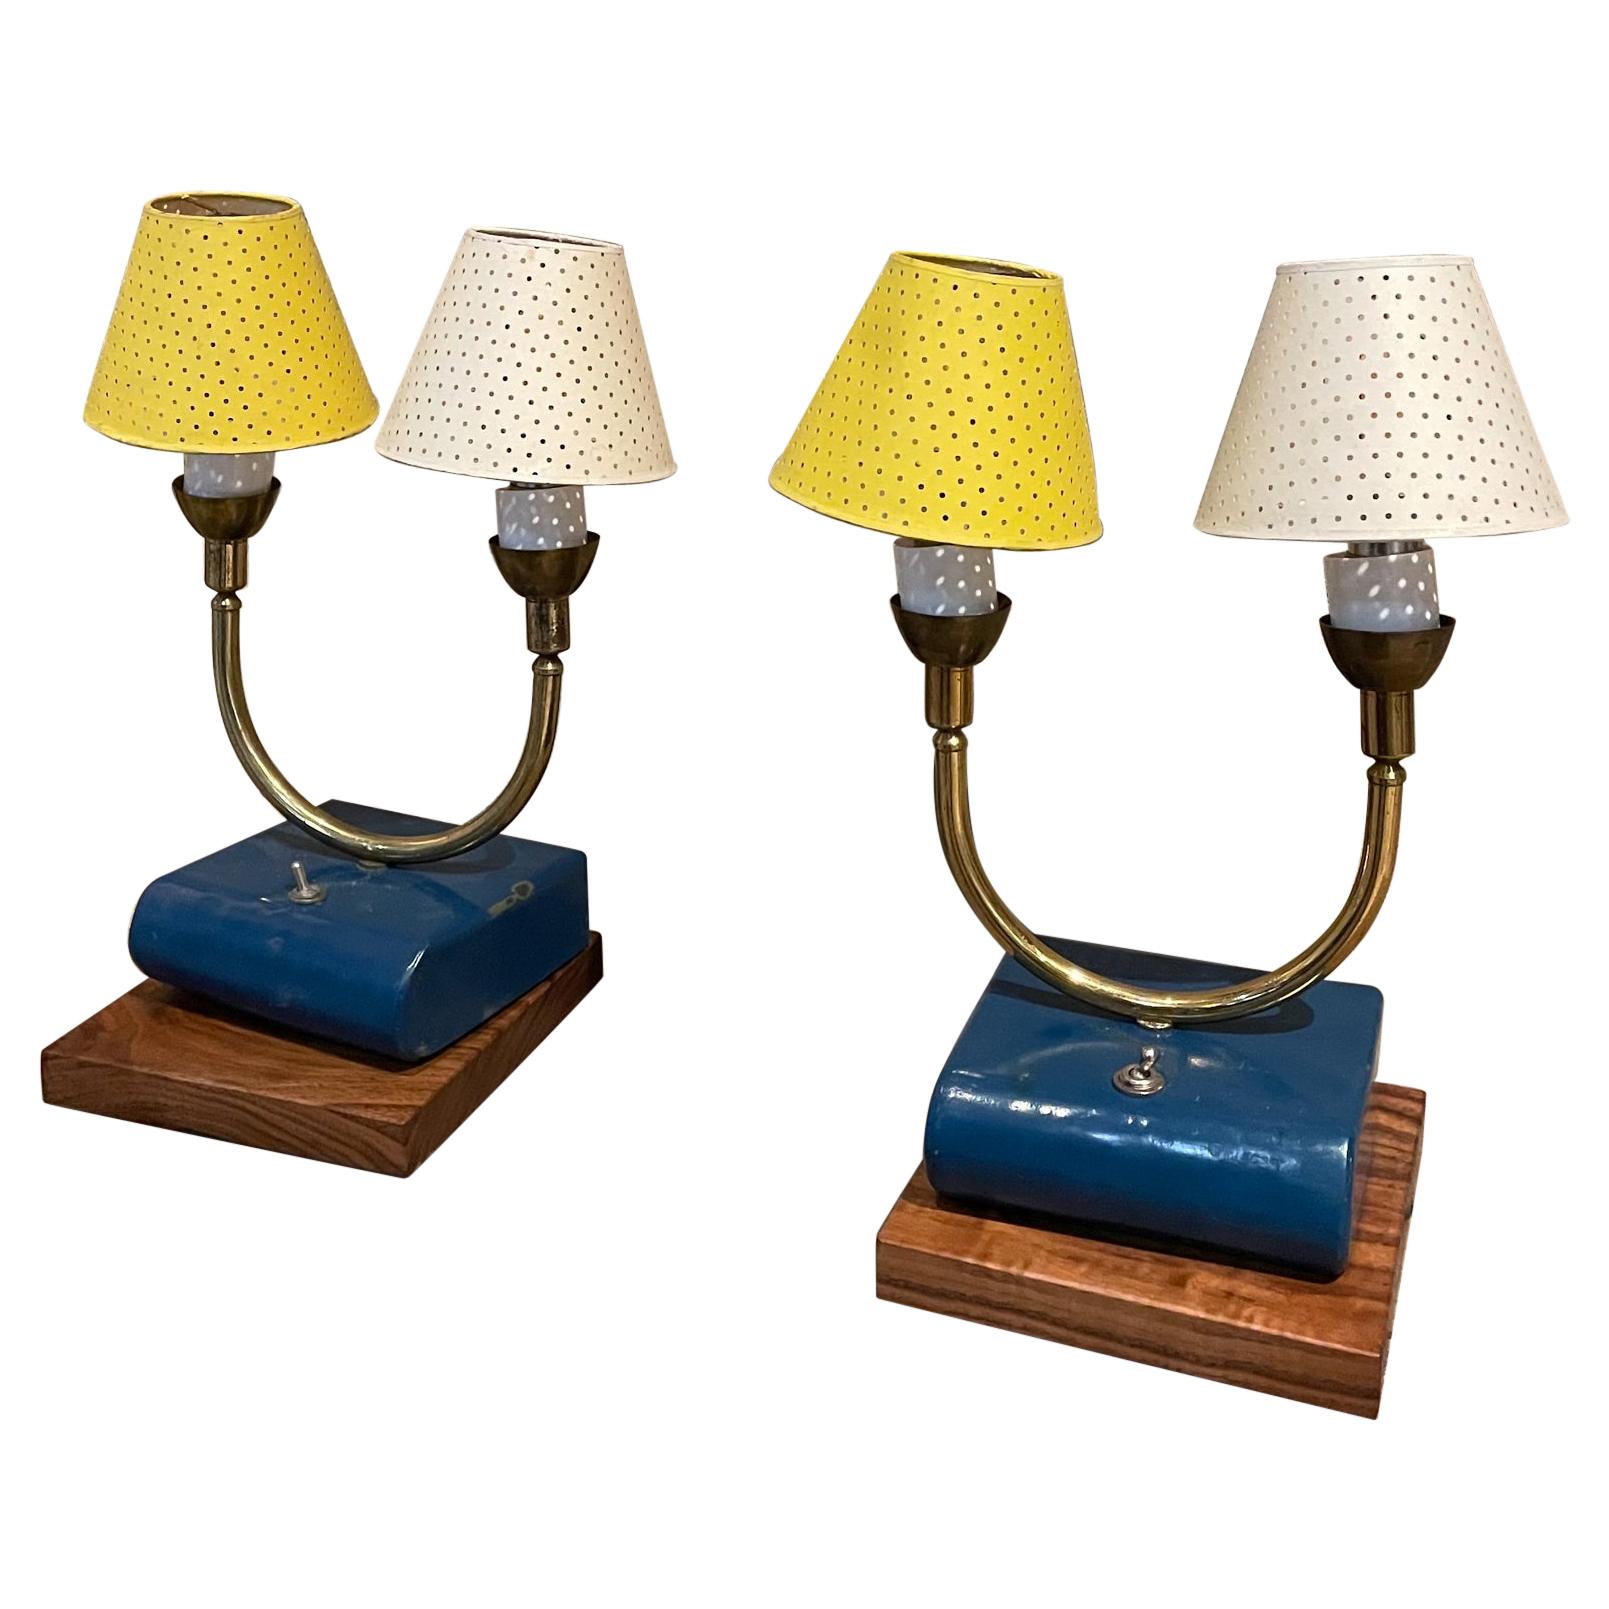 Pair of Totally French Vintage Table Lamps in Blue White & Yellow France, 1950s For Sale